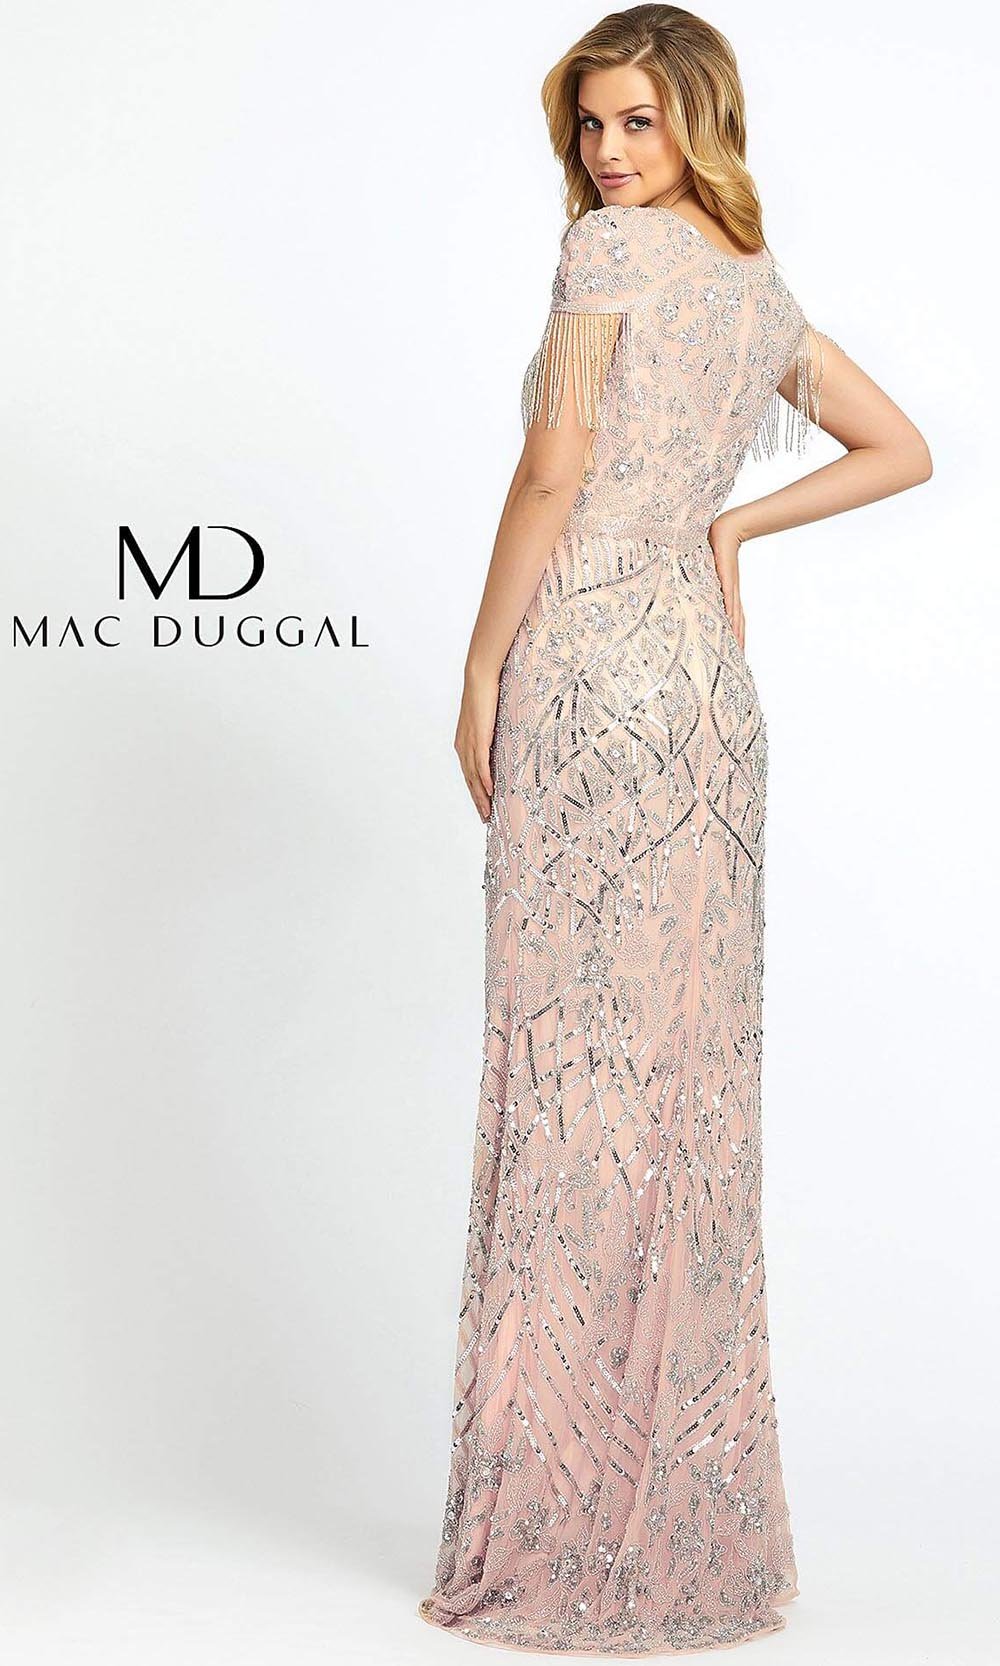 MacDuggal 4715 full length light beige evening sequin dress with high neck and cap sleeves.Back of long light gold beaded dress is perfect for engagment dress, prom formal party, gala, reception dress. Light pink beaded gown is available in plus sizes